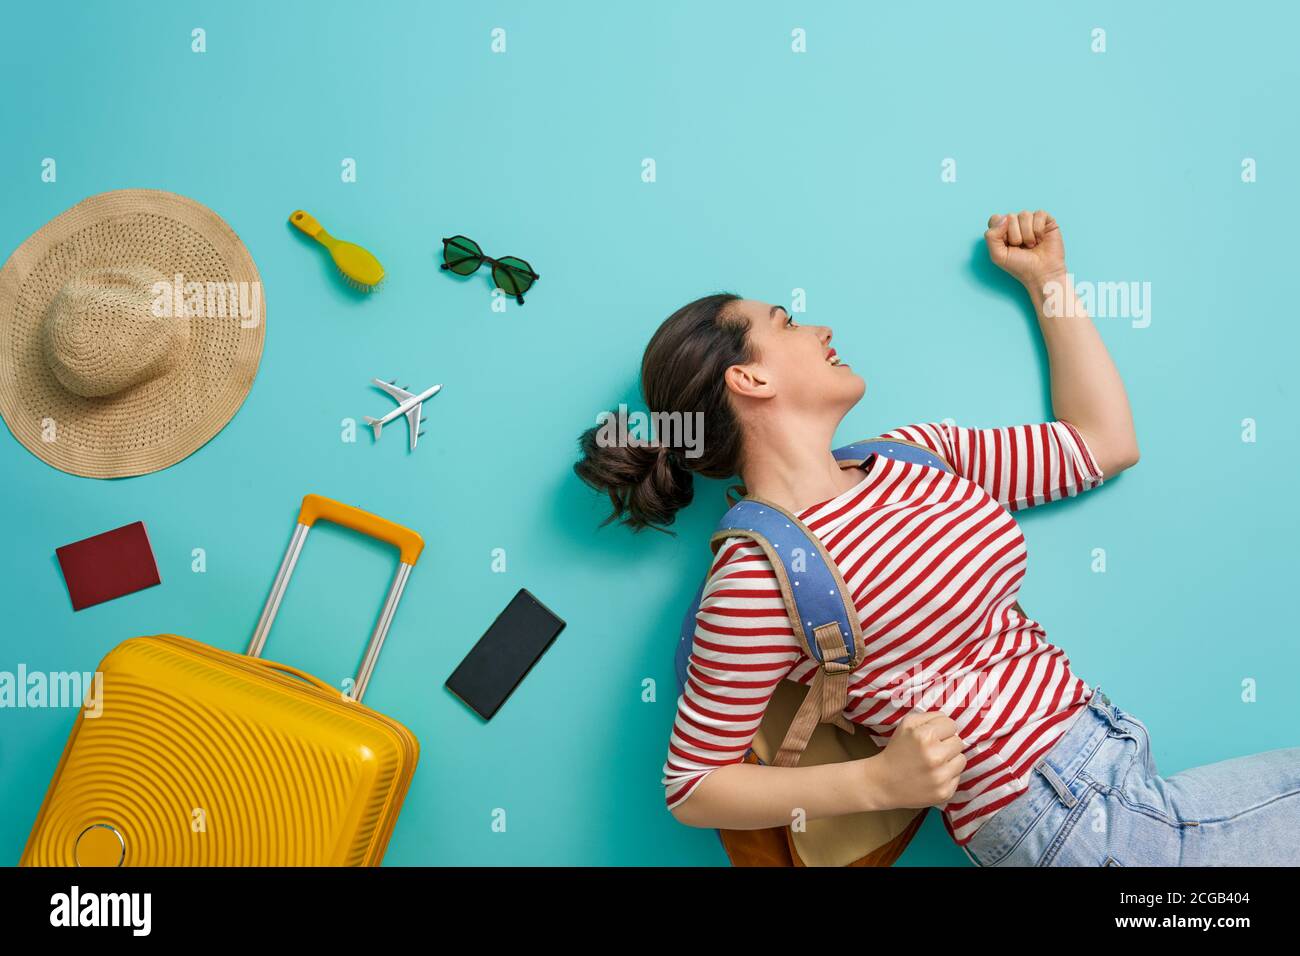 Go on an adventure! Happy woman going traveling. Young person on color teal background. Stock Photo